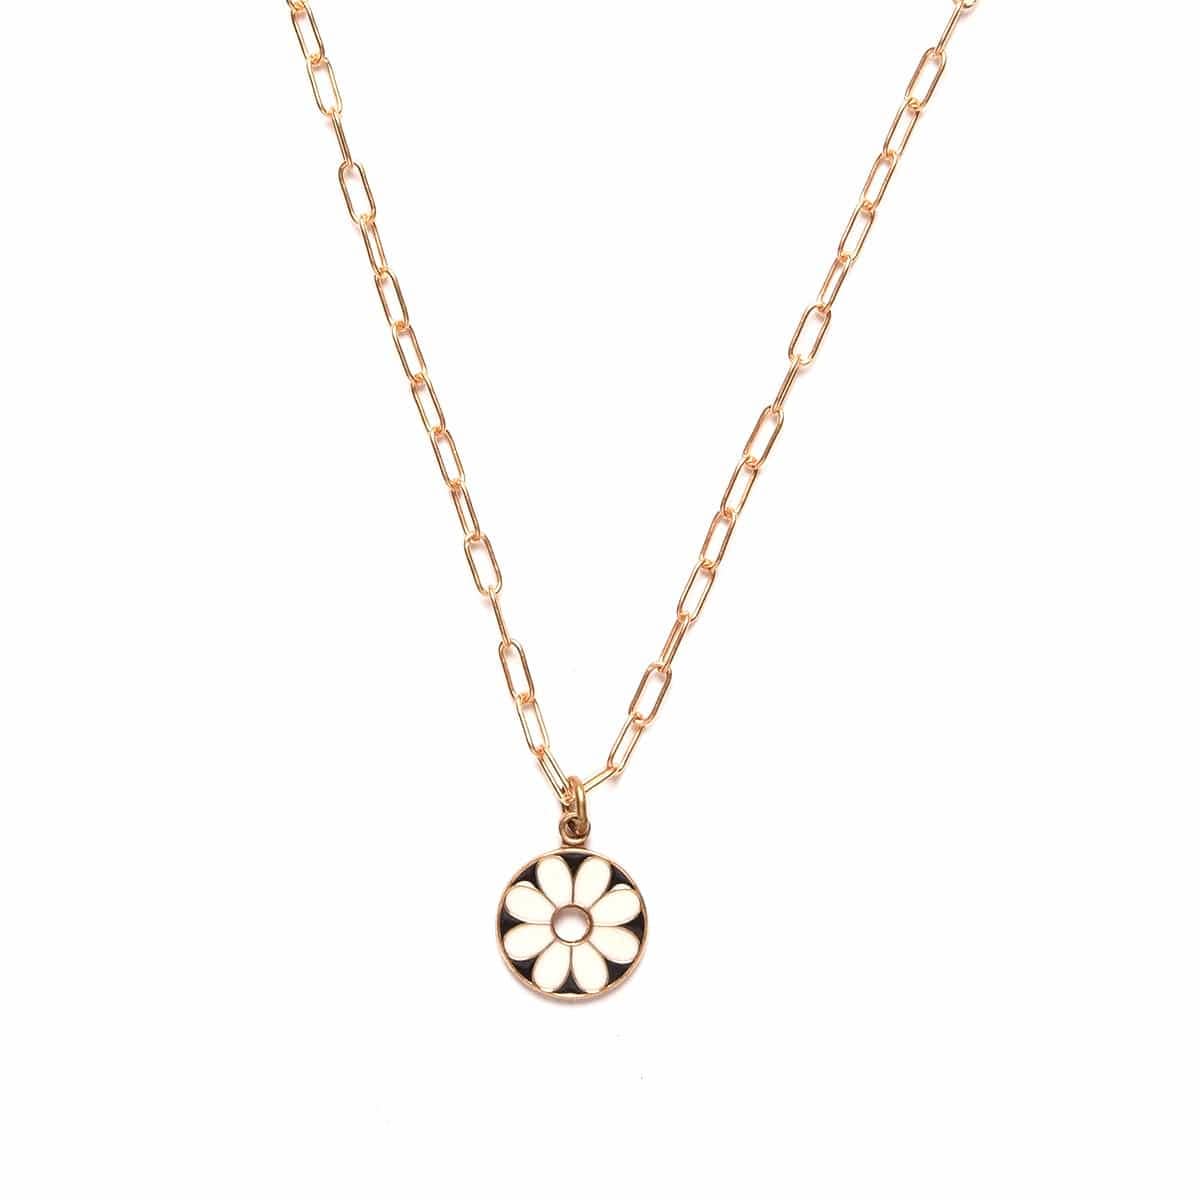 Flower Power Charm Necklace in White & Black: 17" / 14kt gold filled